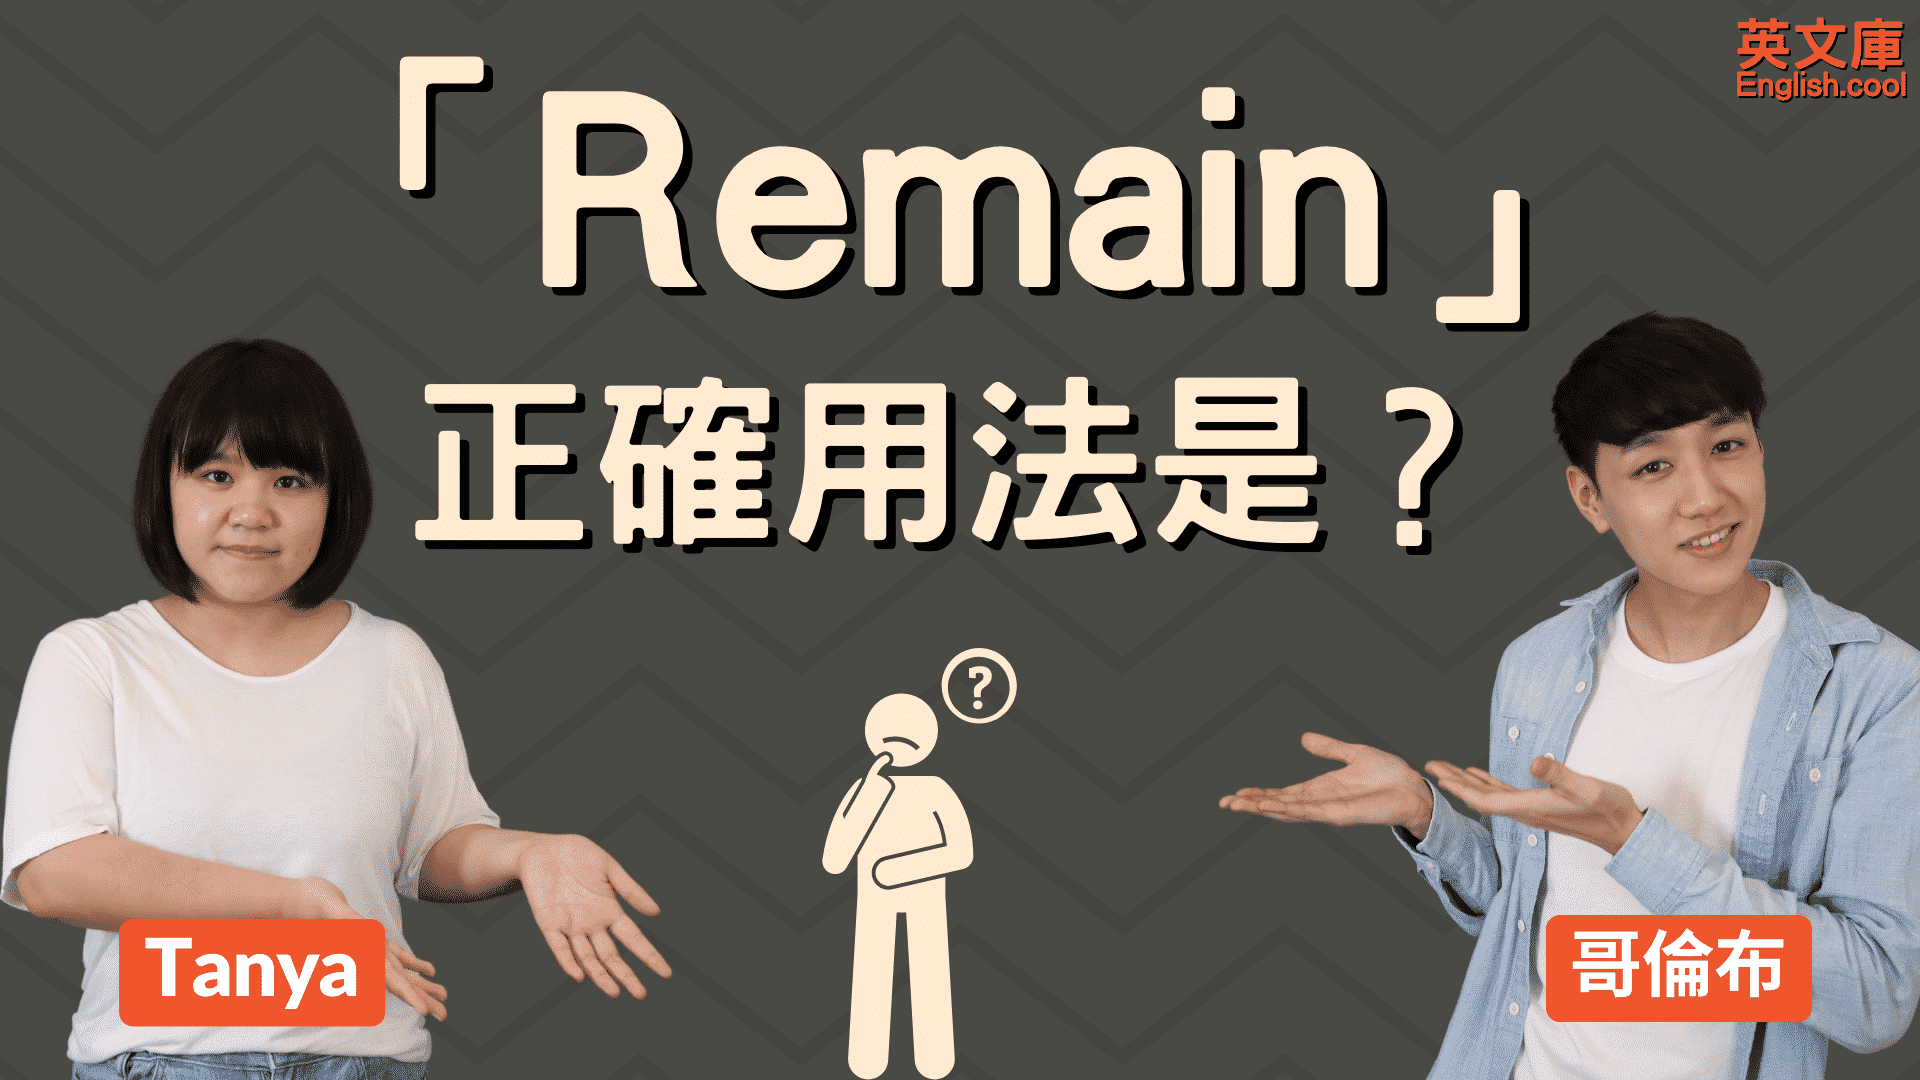 You are currently viewing 「remain」的用法是？跟Keep差在哪？